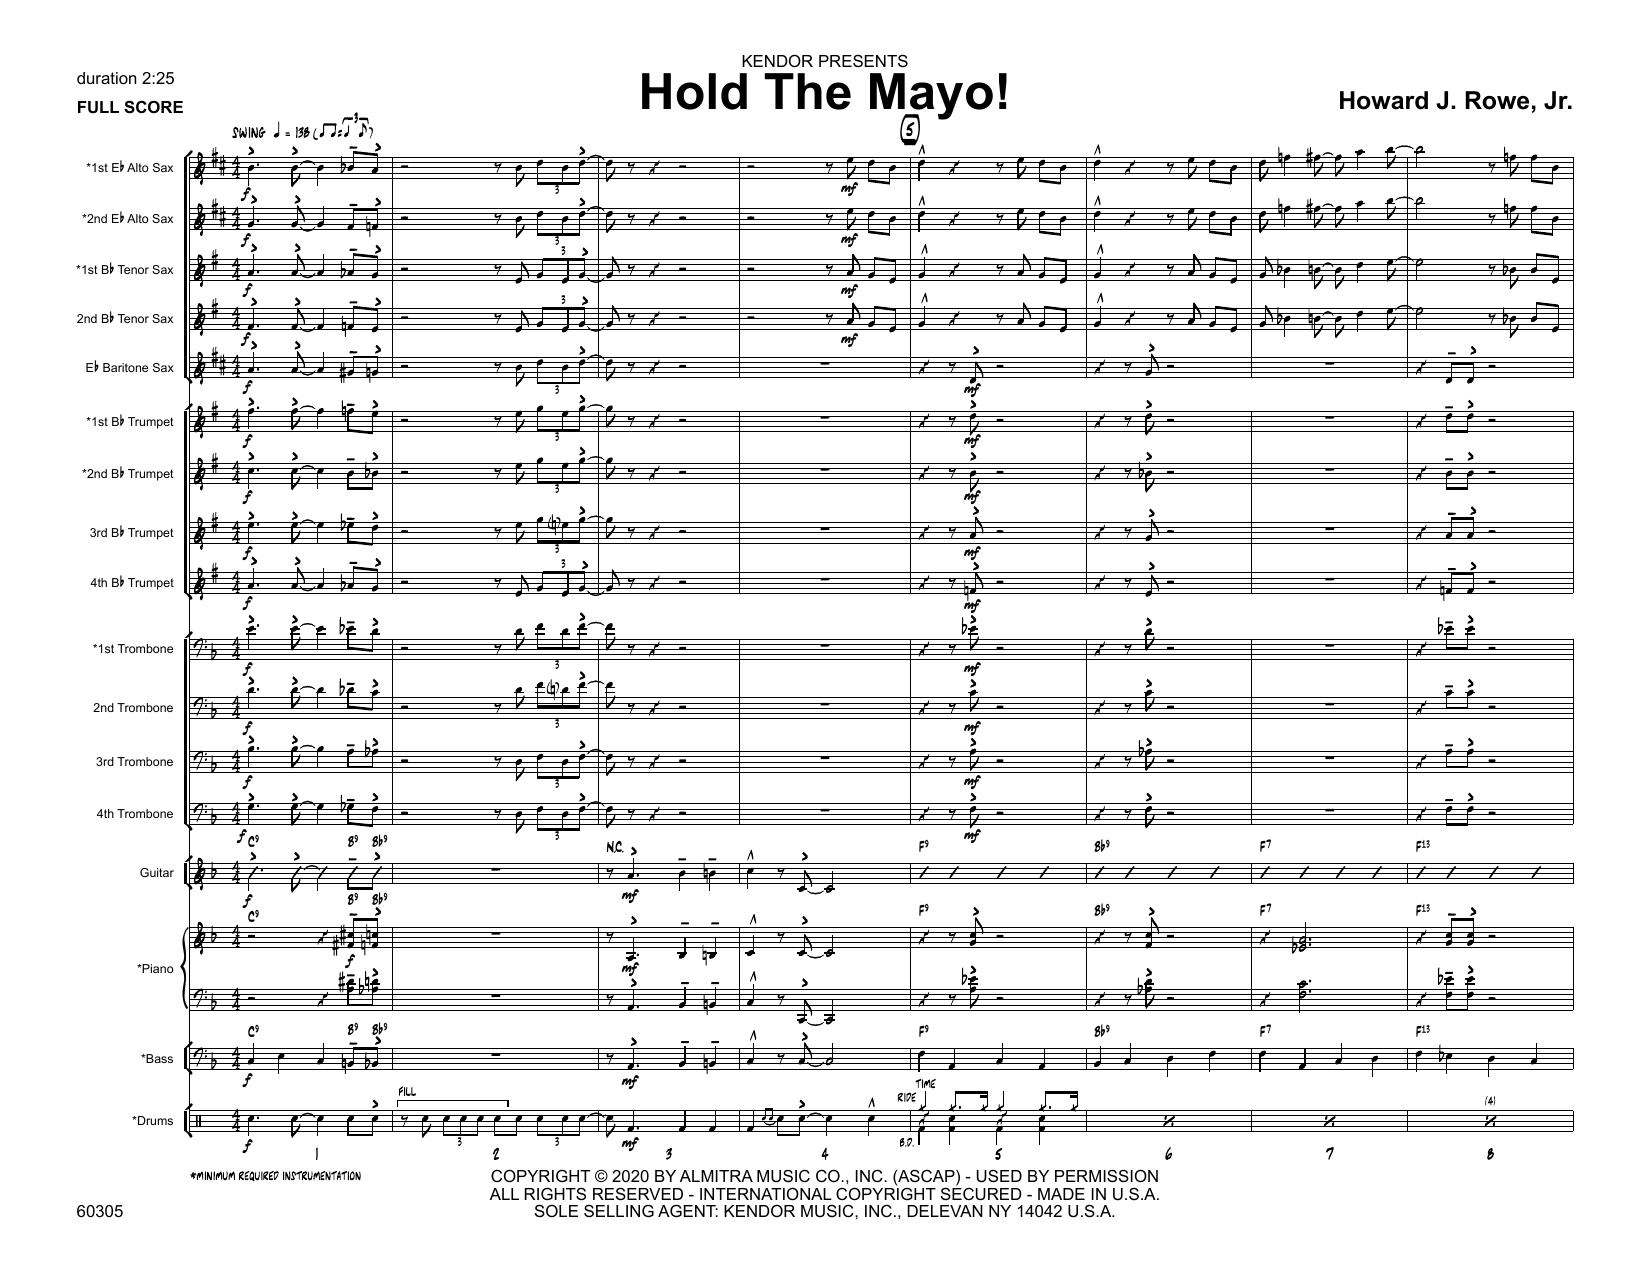 Download Howard Rowe Hold The Mayo! - Full Score Sheet Music